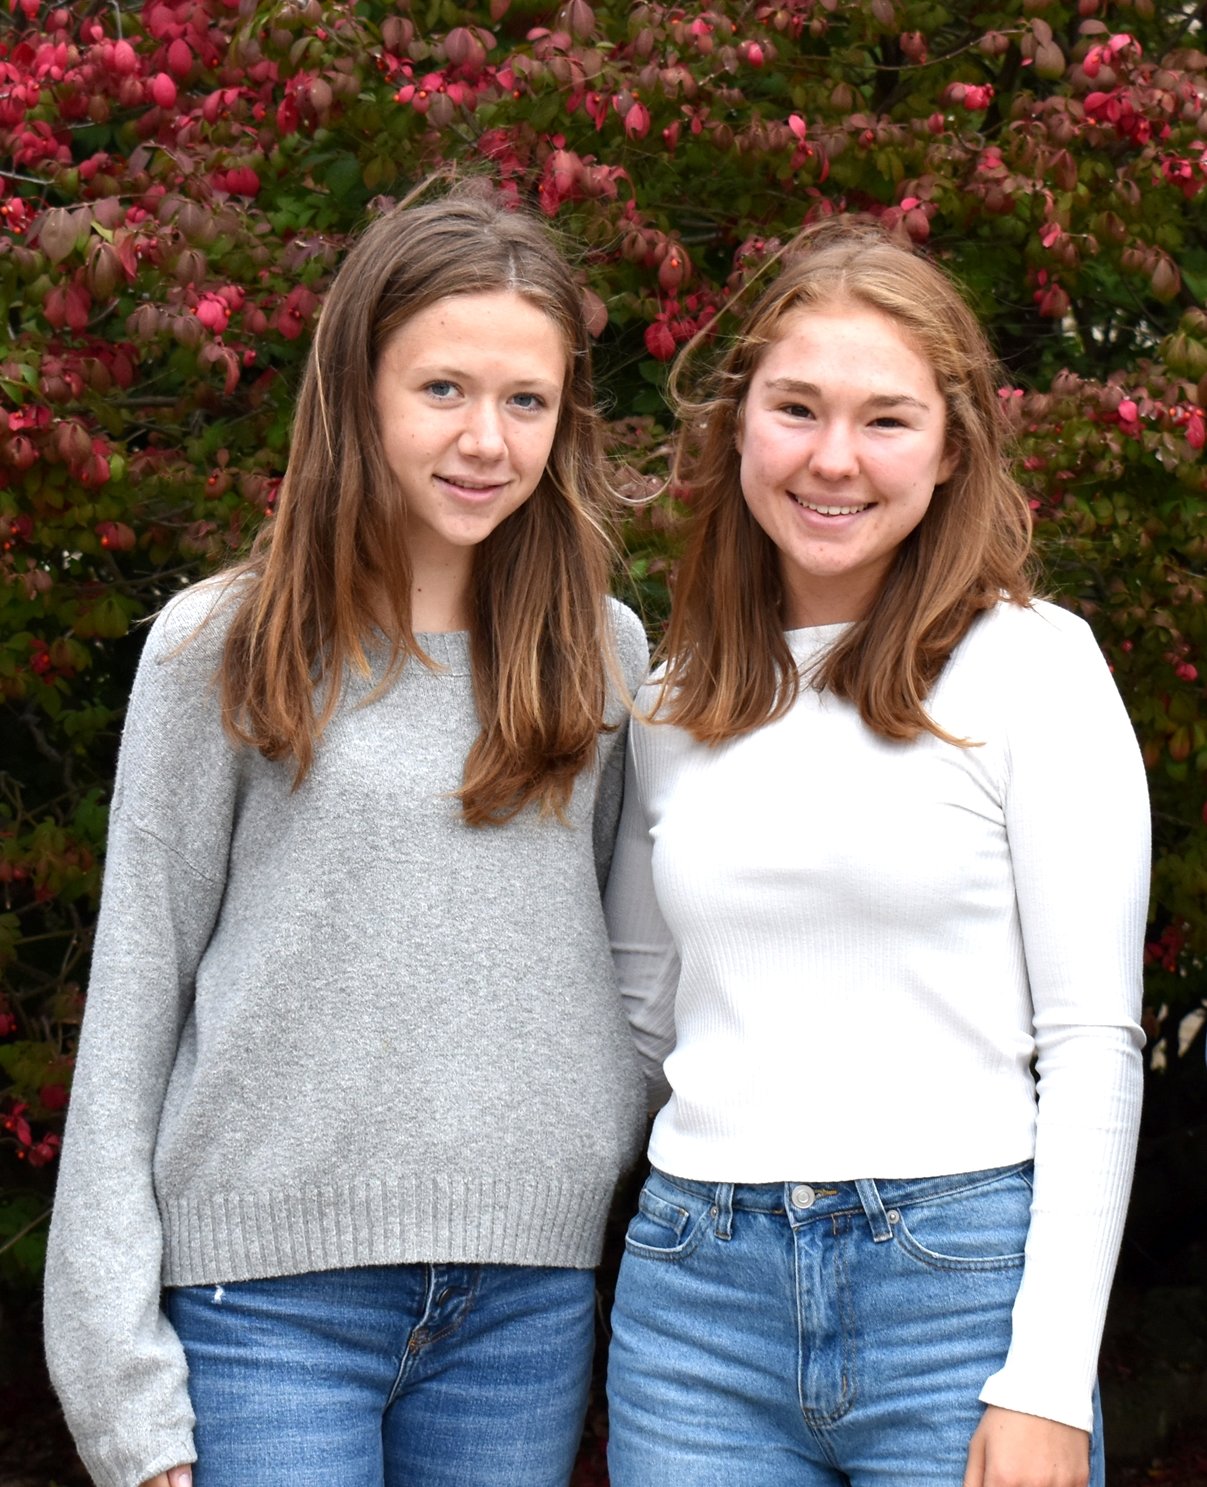 Best friends Emma Nelson, left, and Kate Gilliam were named as North Shore High School’s salutatorian and valedictorian, respectively.